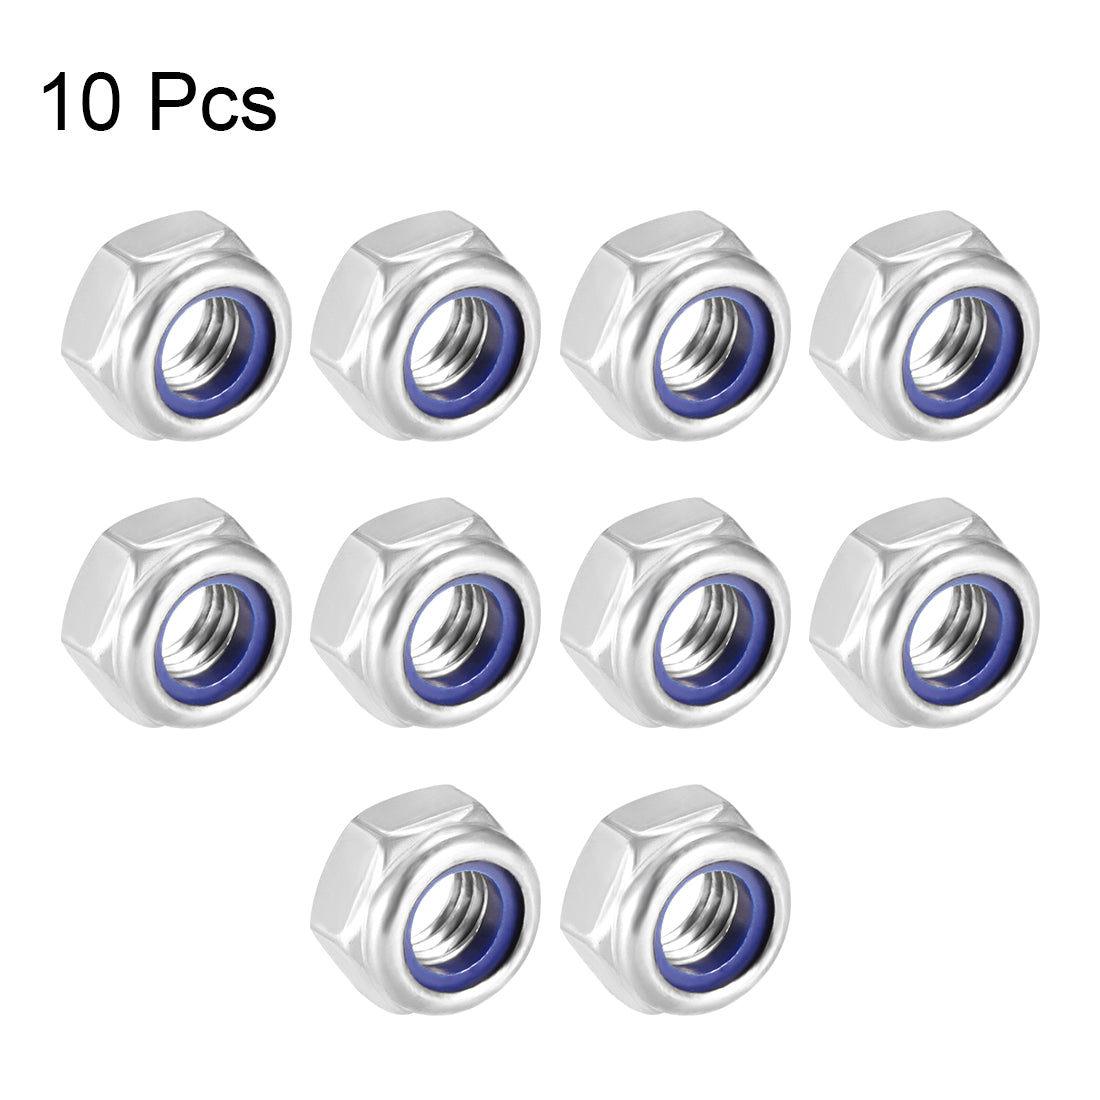 uxcell Uxcell M8x1.25mm Hex Lock Nuts Stainless Steel Nylon Insert Self-Lock Nut, 10Pcs Silver